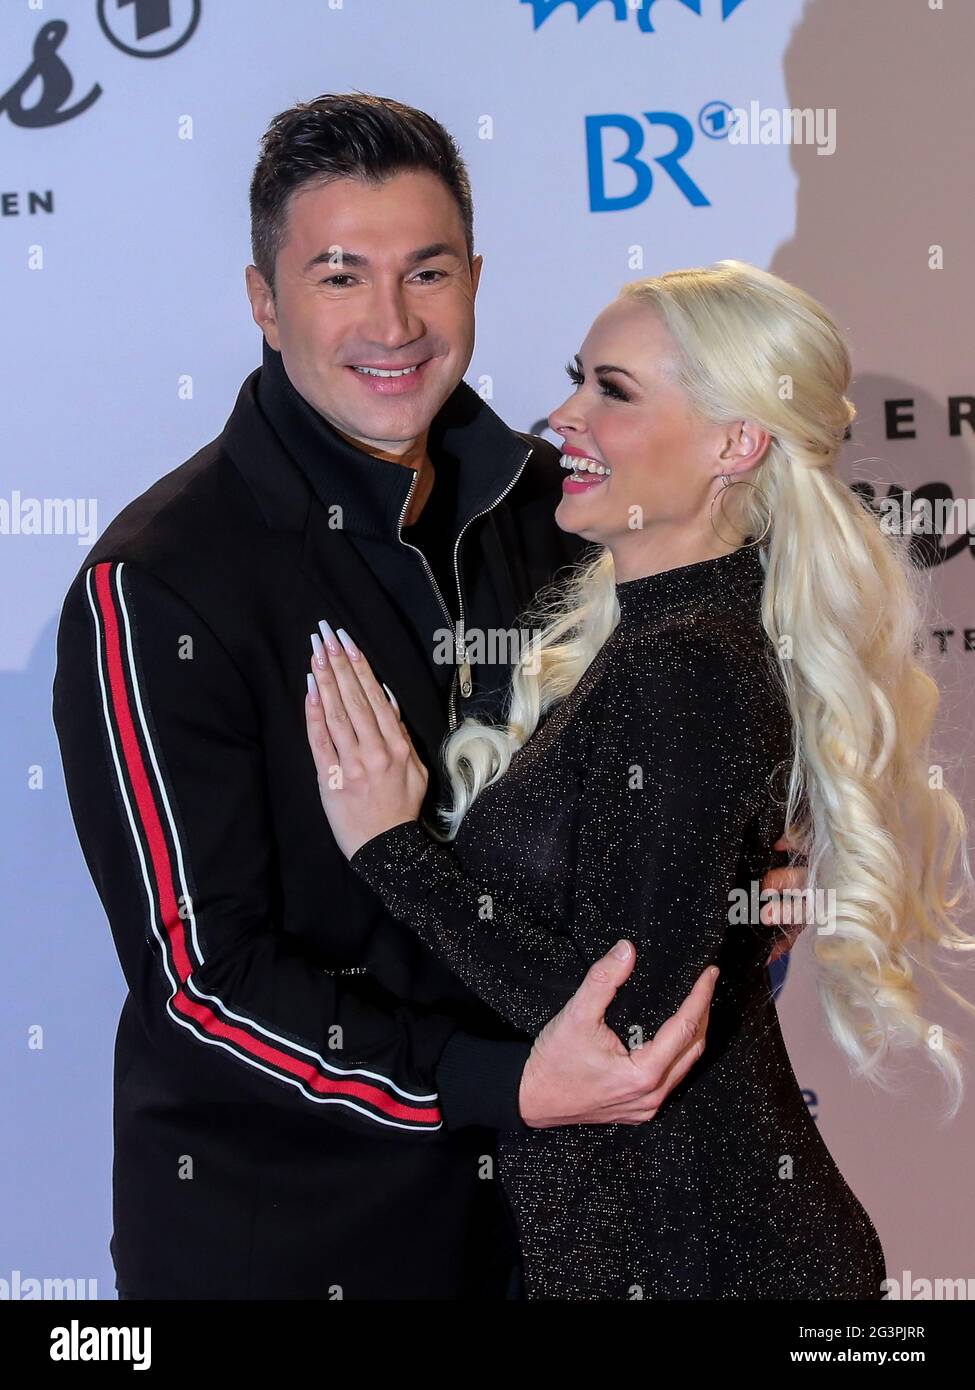 Singer Lucas Cordalis with German model and singer wife Daniela Katzenberger Schlagerchampions 2020 Stock Photo